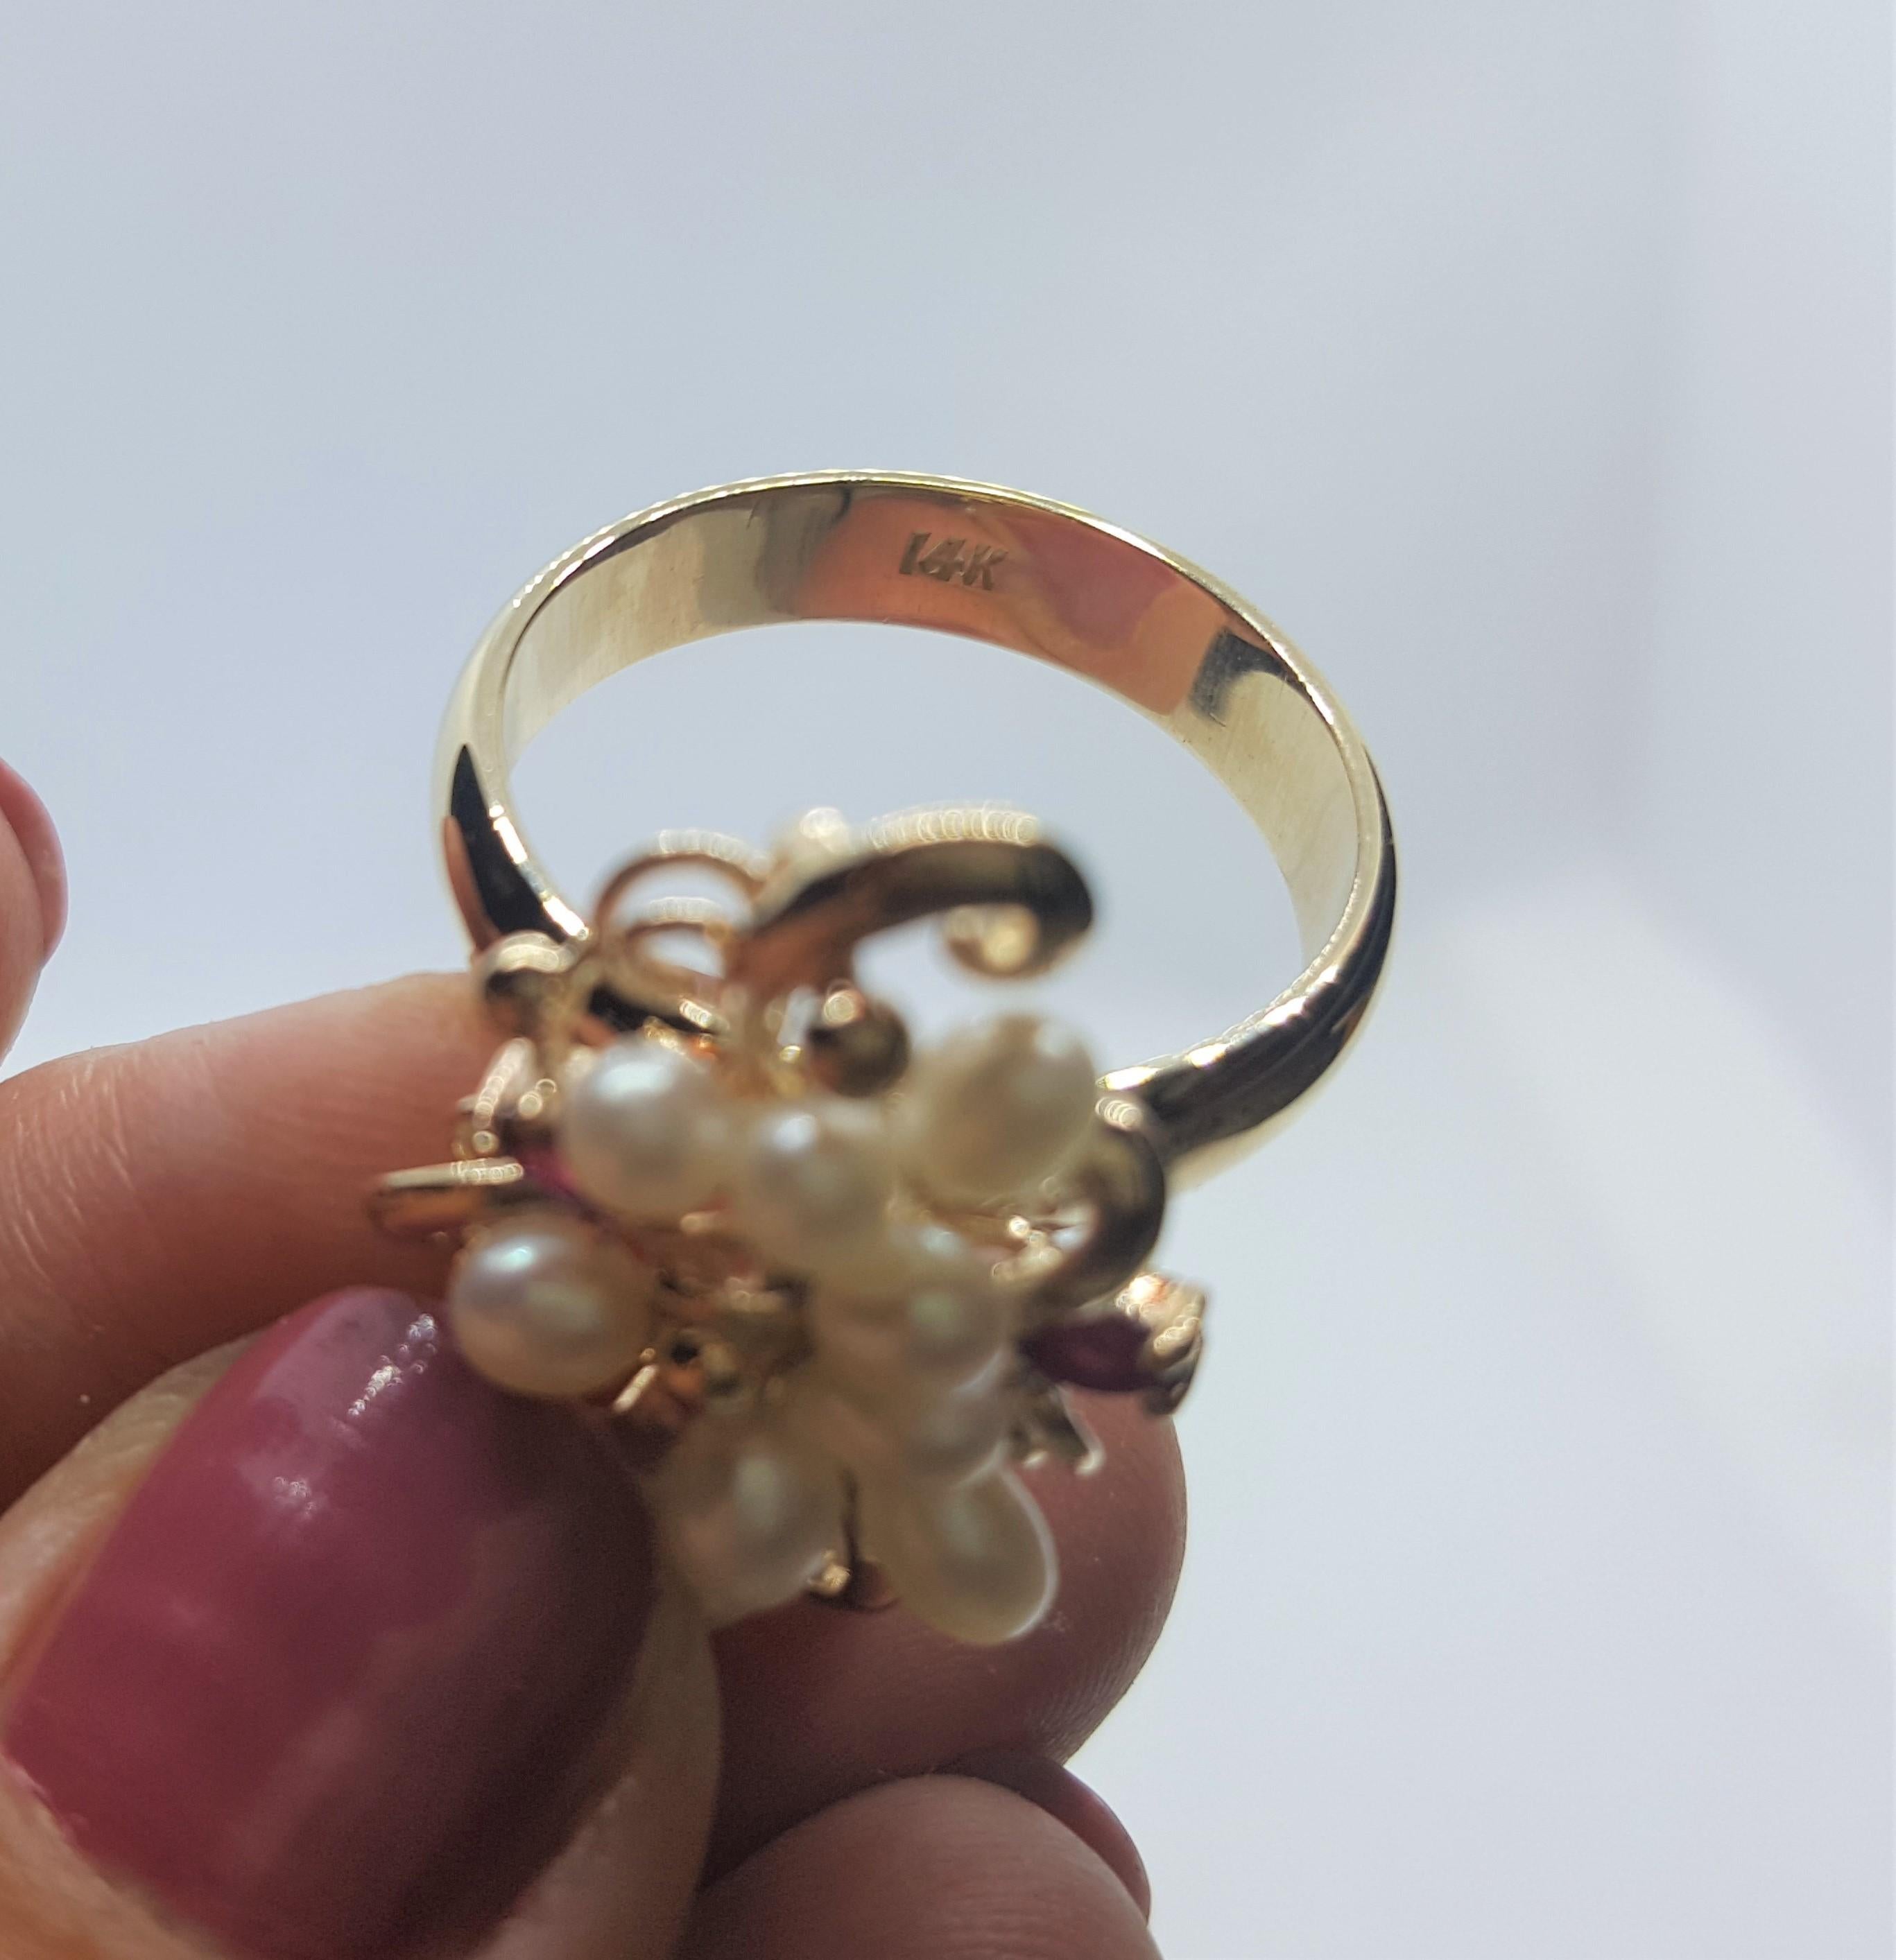 Unique 14kt yellow gold ring with 12 freshwater white pearls, 2 marquis-shaped rubies of approximately .06cttw. The pearls are in very good condition with clean lustrous nacre. The ring is 10.25 in size but it can be sized; the ring weighs 9.3 grams